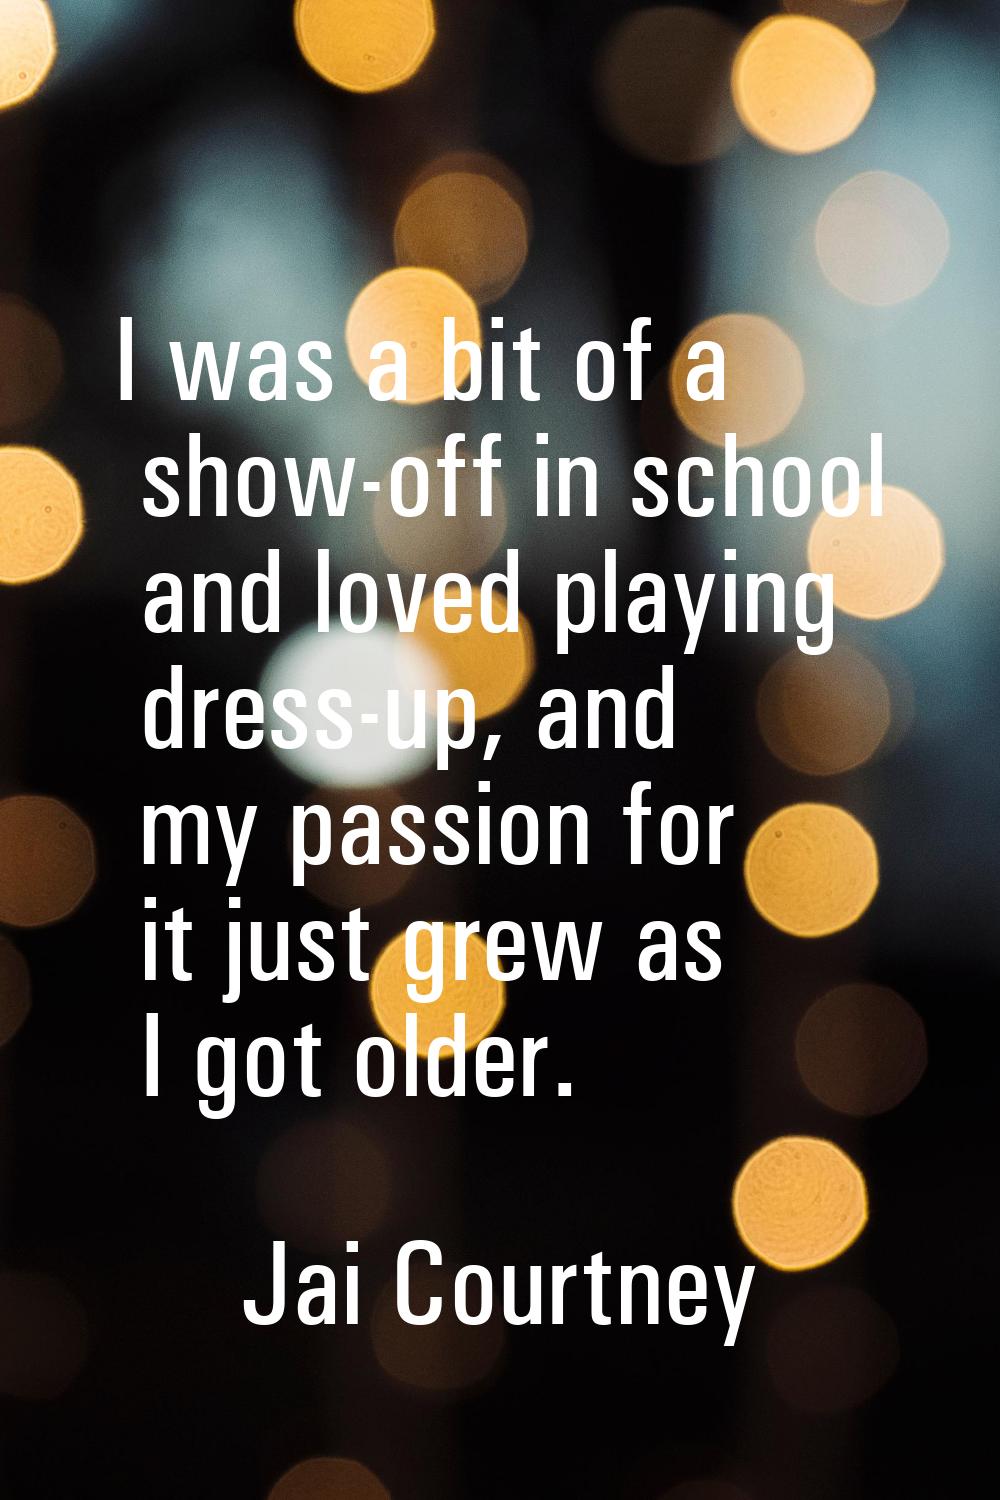 I was a bit of a show-off in school and loved playing dress-up, and my passion for it just grew as 